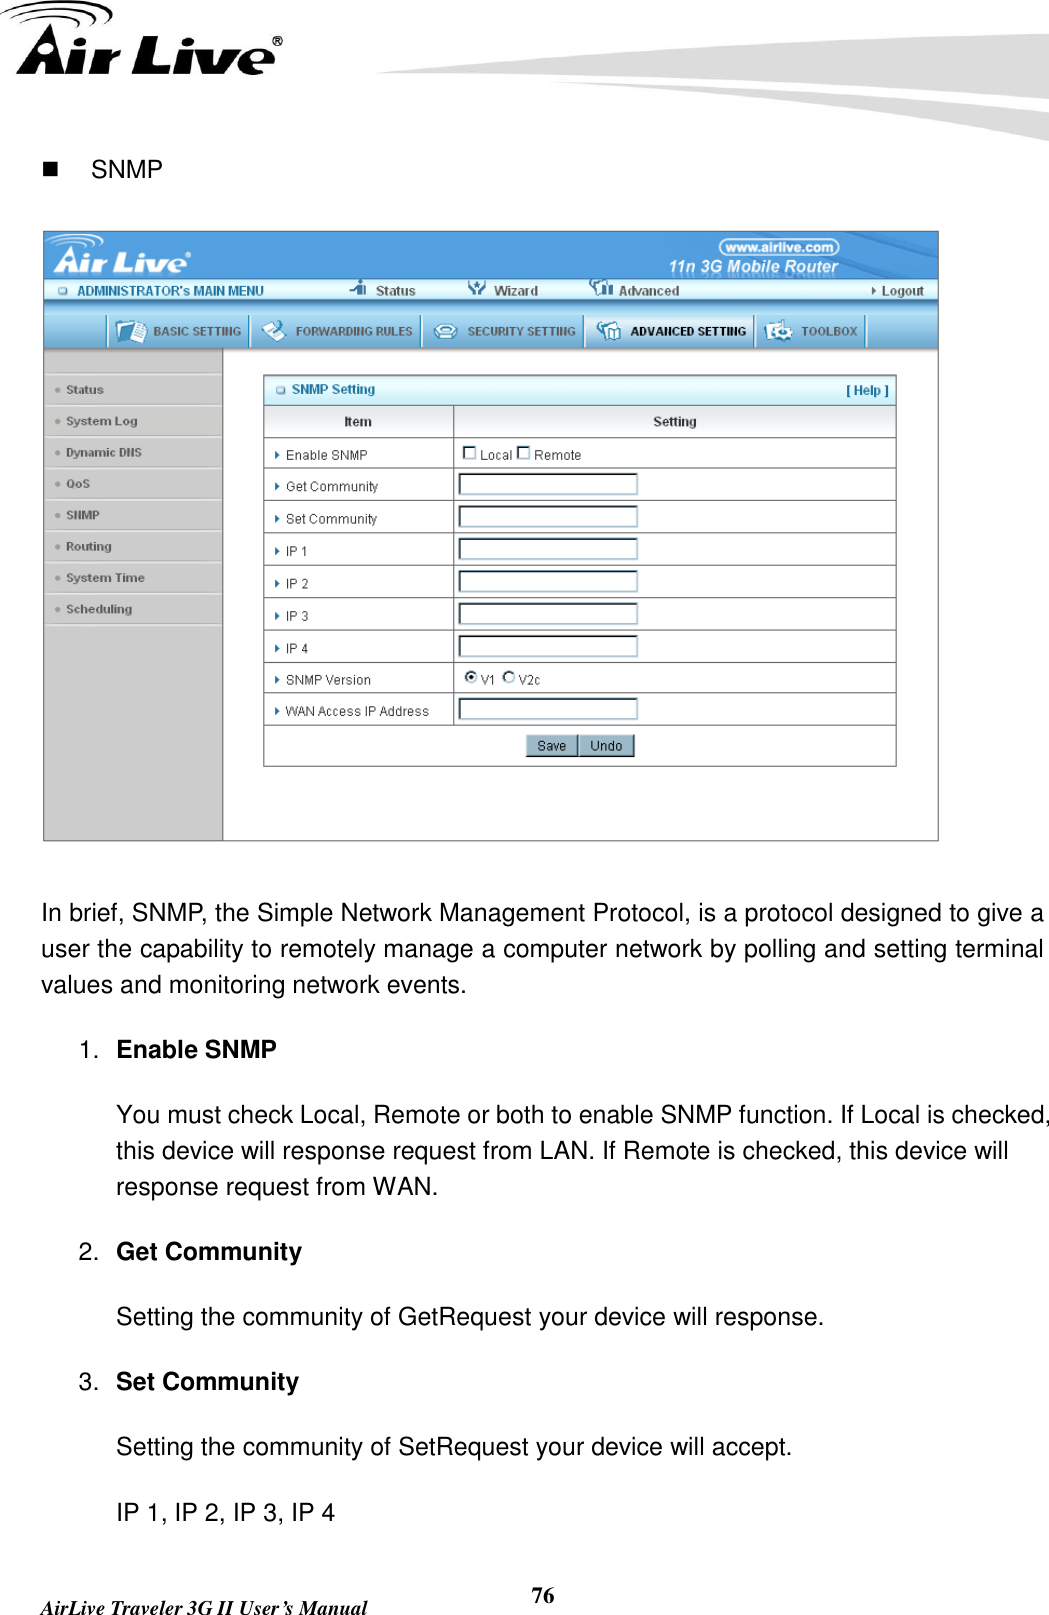   AirLive Traveler 3G II User’s Manual 76   SNMP  In brief, SNMP, the Simple Network Management Protocol, is a protocol designed to give a user the capability to remotely manage a computer network by polling and setting terminal values and monitoring network events.   1. Enable SNMP You must check Local, Remote or both to enable SNMP function. If Local is checked, this device will response request from LAN. If Remote is checked, this device will response request from WAN.   2. Get Community Setting the community of GetRequest your device will response.   3. Set Community Setting the community of SetRequest your device will accept.   IP 1, IP 2, IP 3, IP 4 